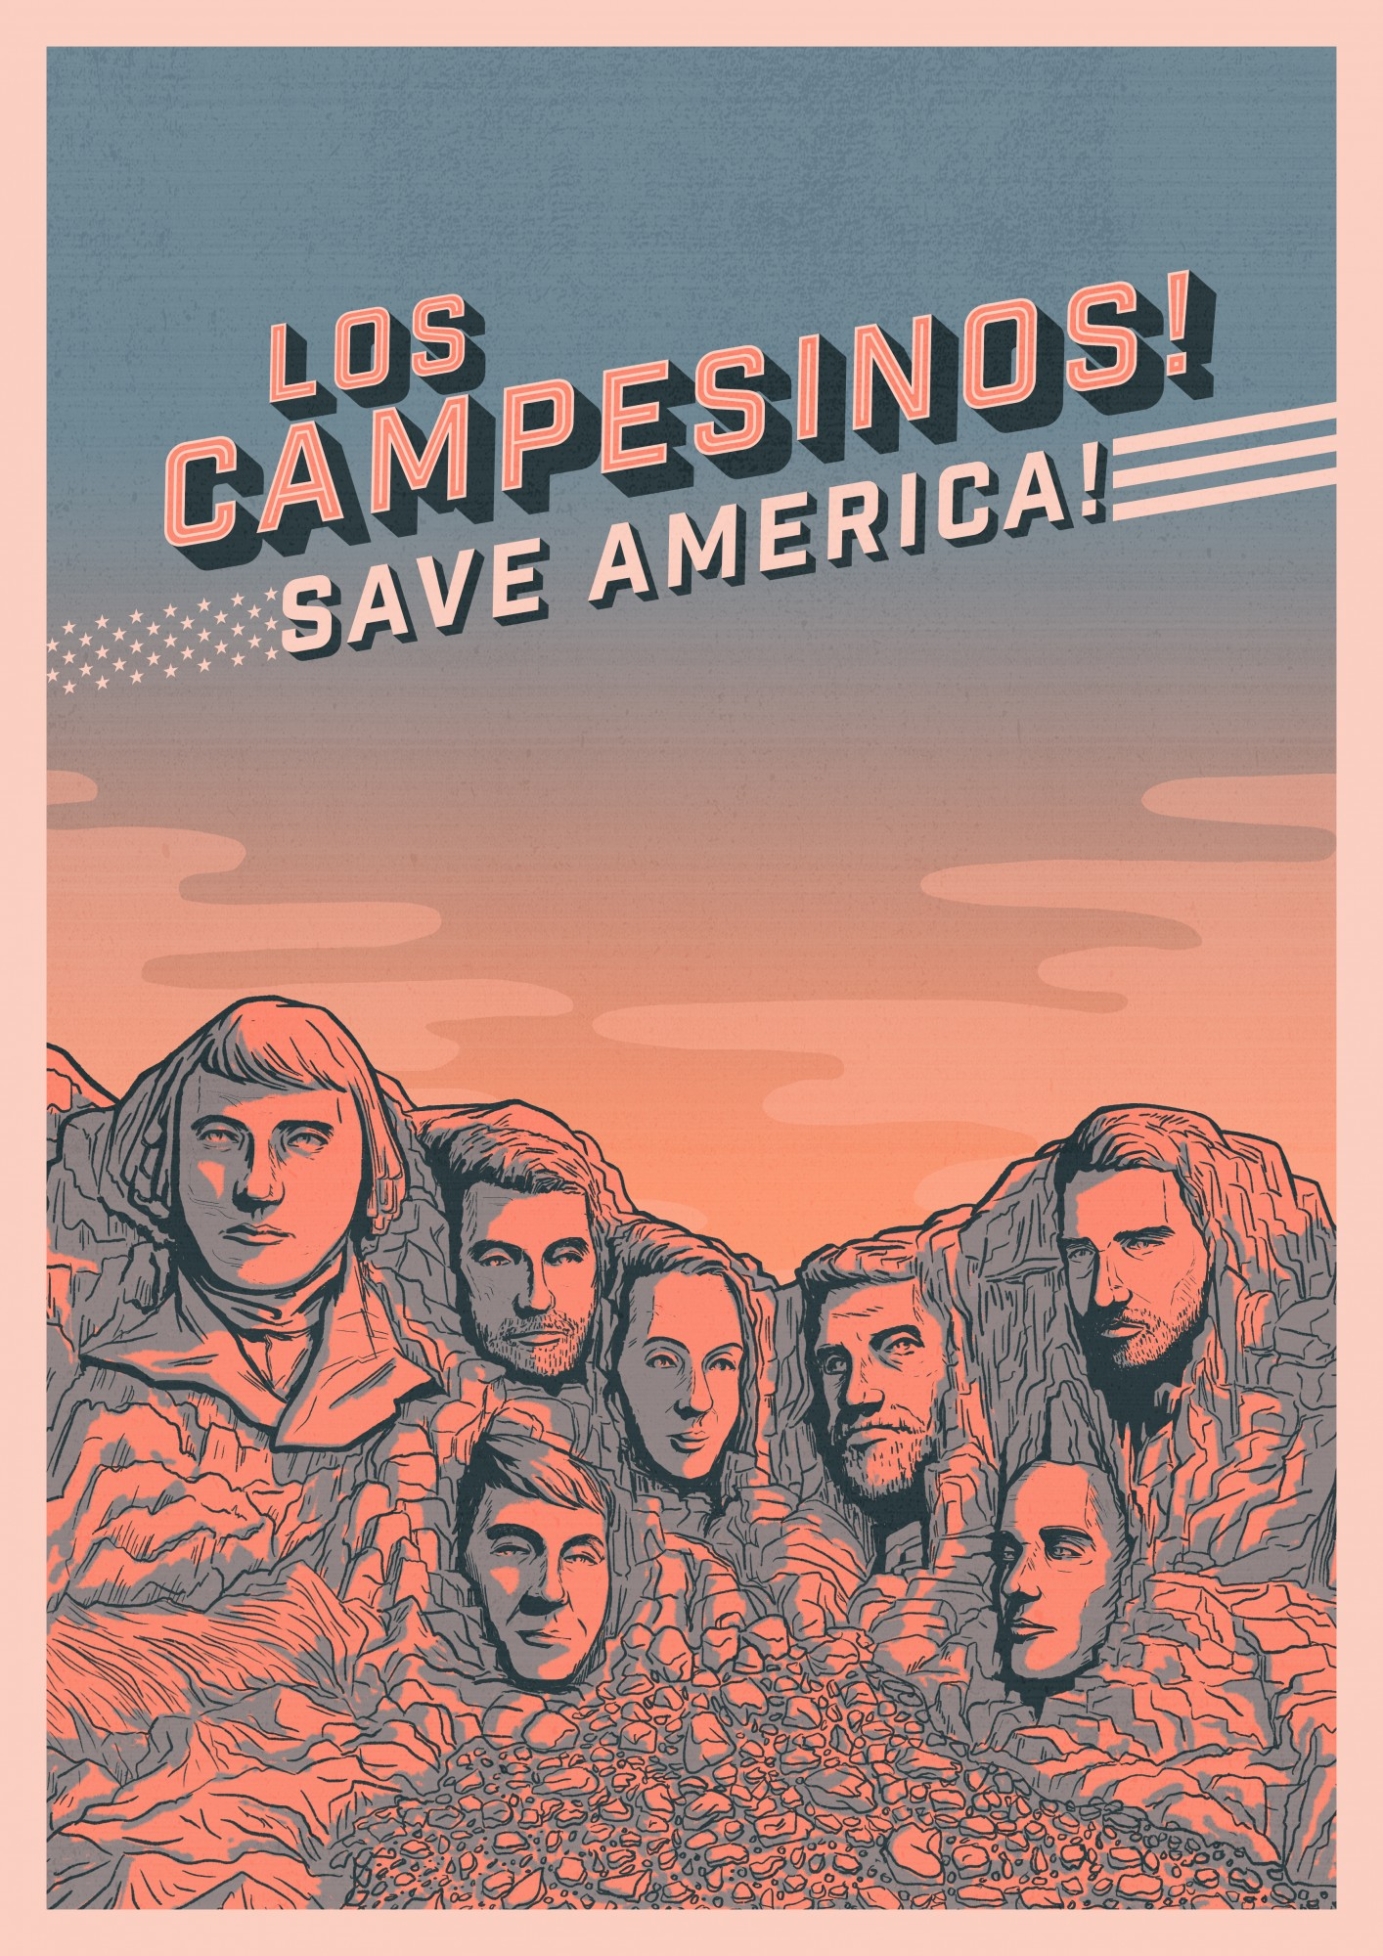 Social Media for Los Campesinos! by R-Corp